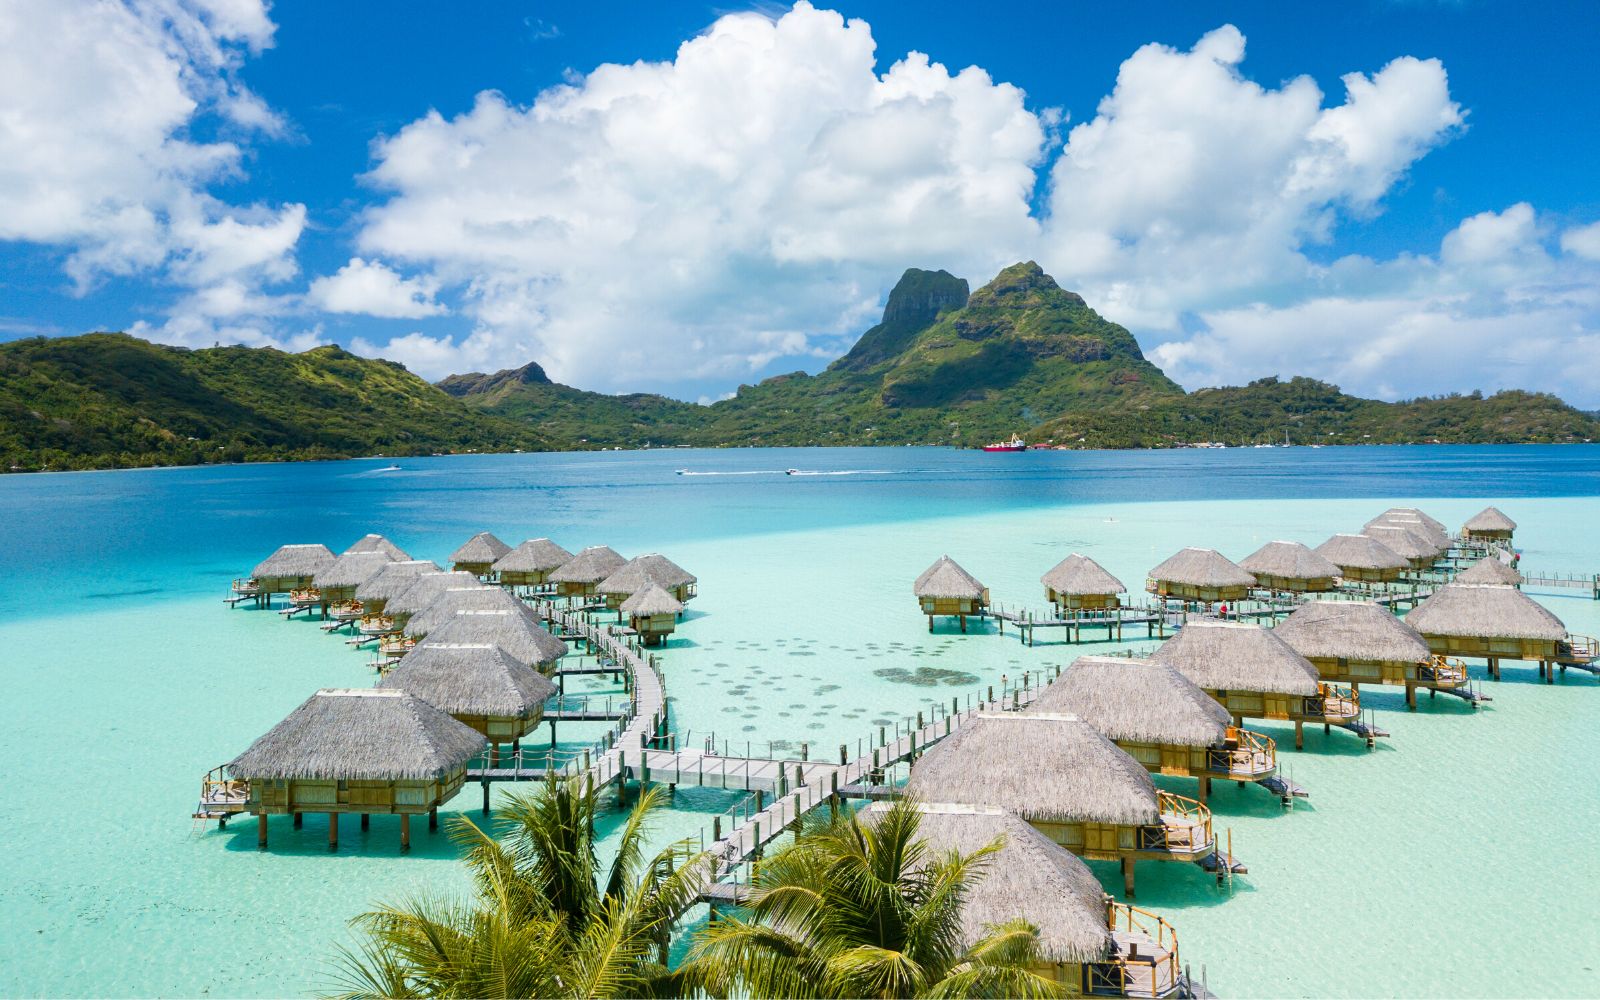 You Can Now Fly Direct To Tahiti From These 4 U.S. Cities